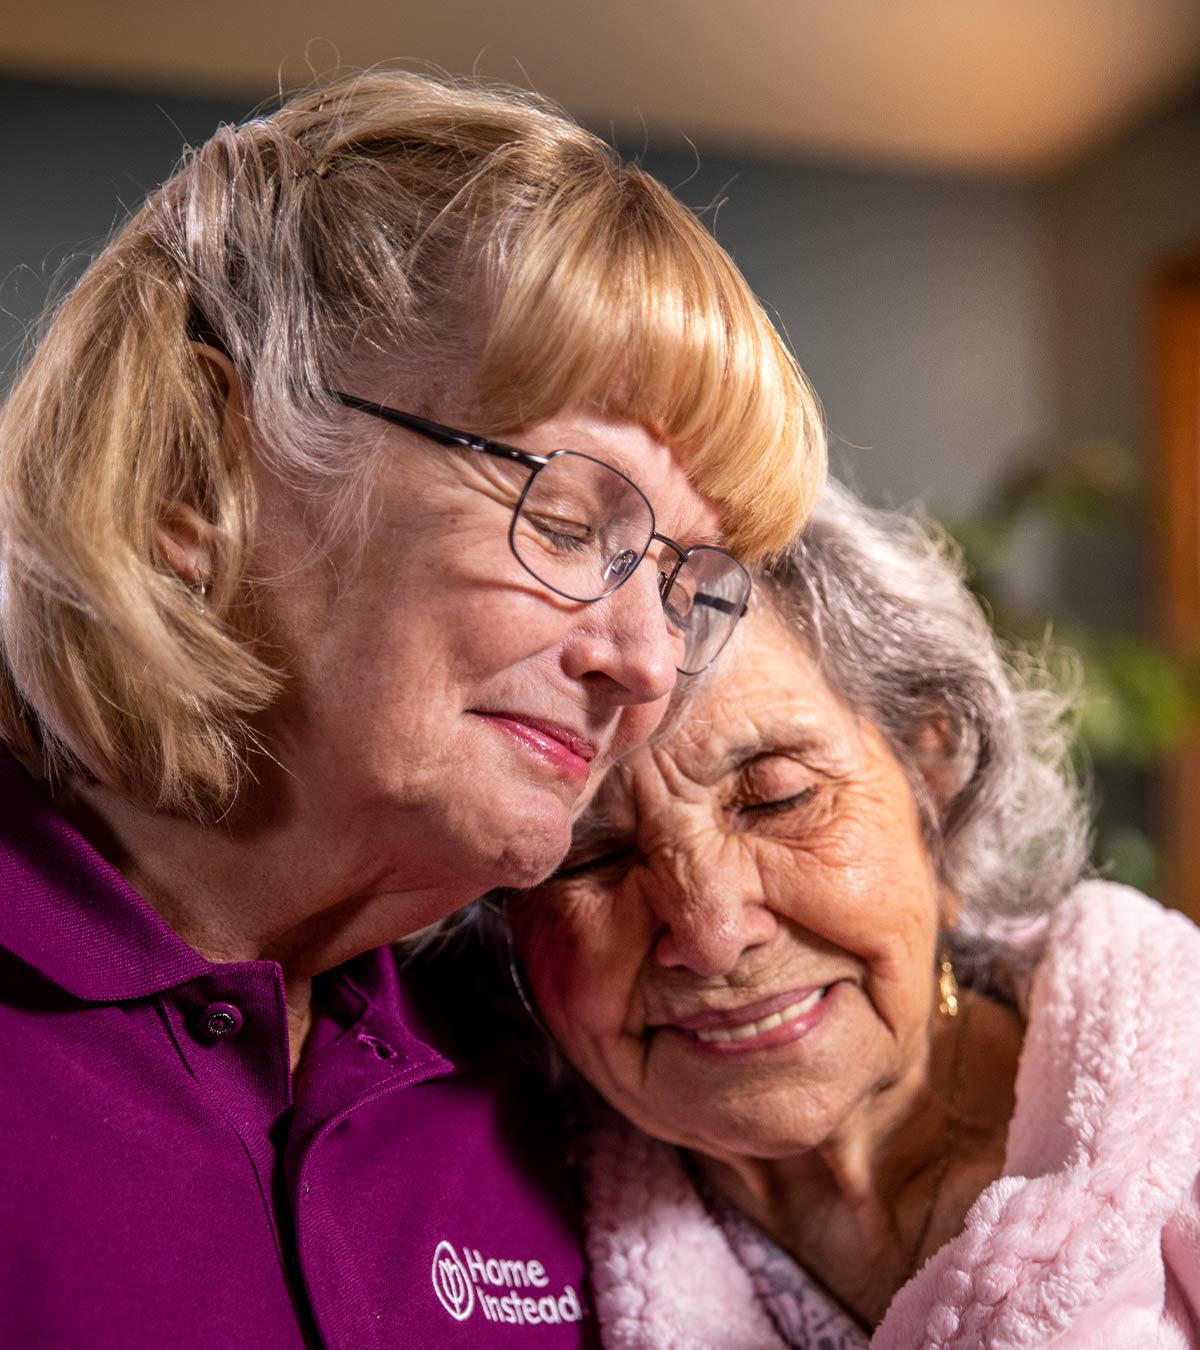 CAREGiver providing in-home senior care services. Home Instead of St. Augustine, FL provides Elder Care to aging adults. 